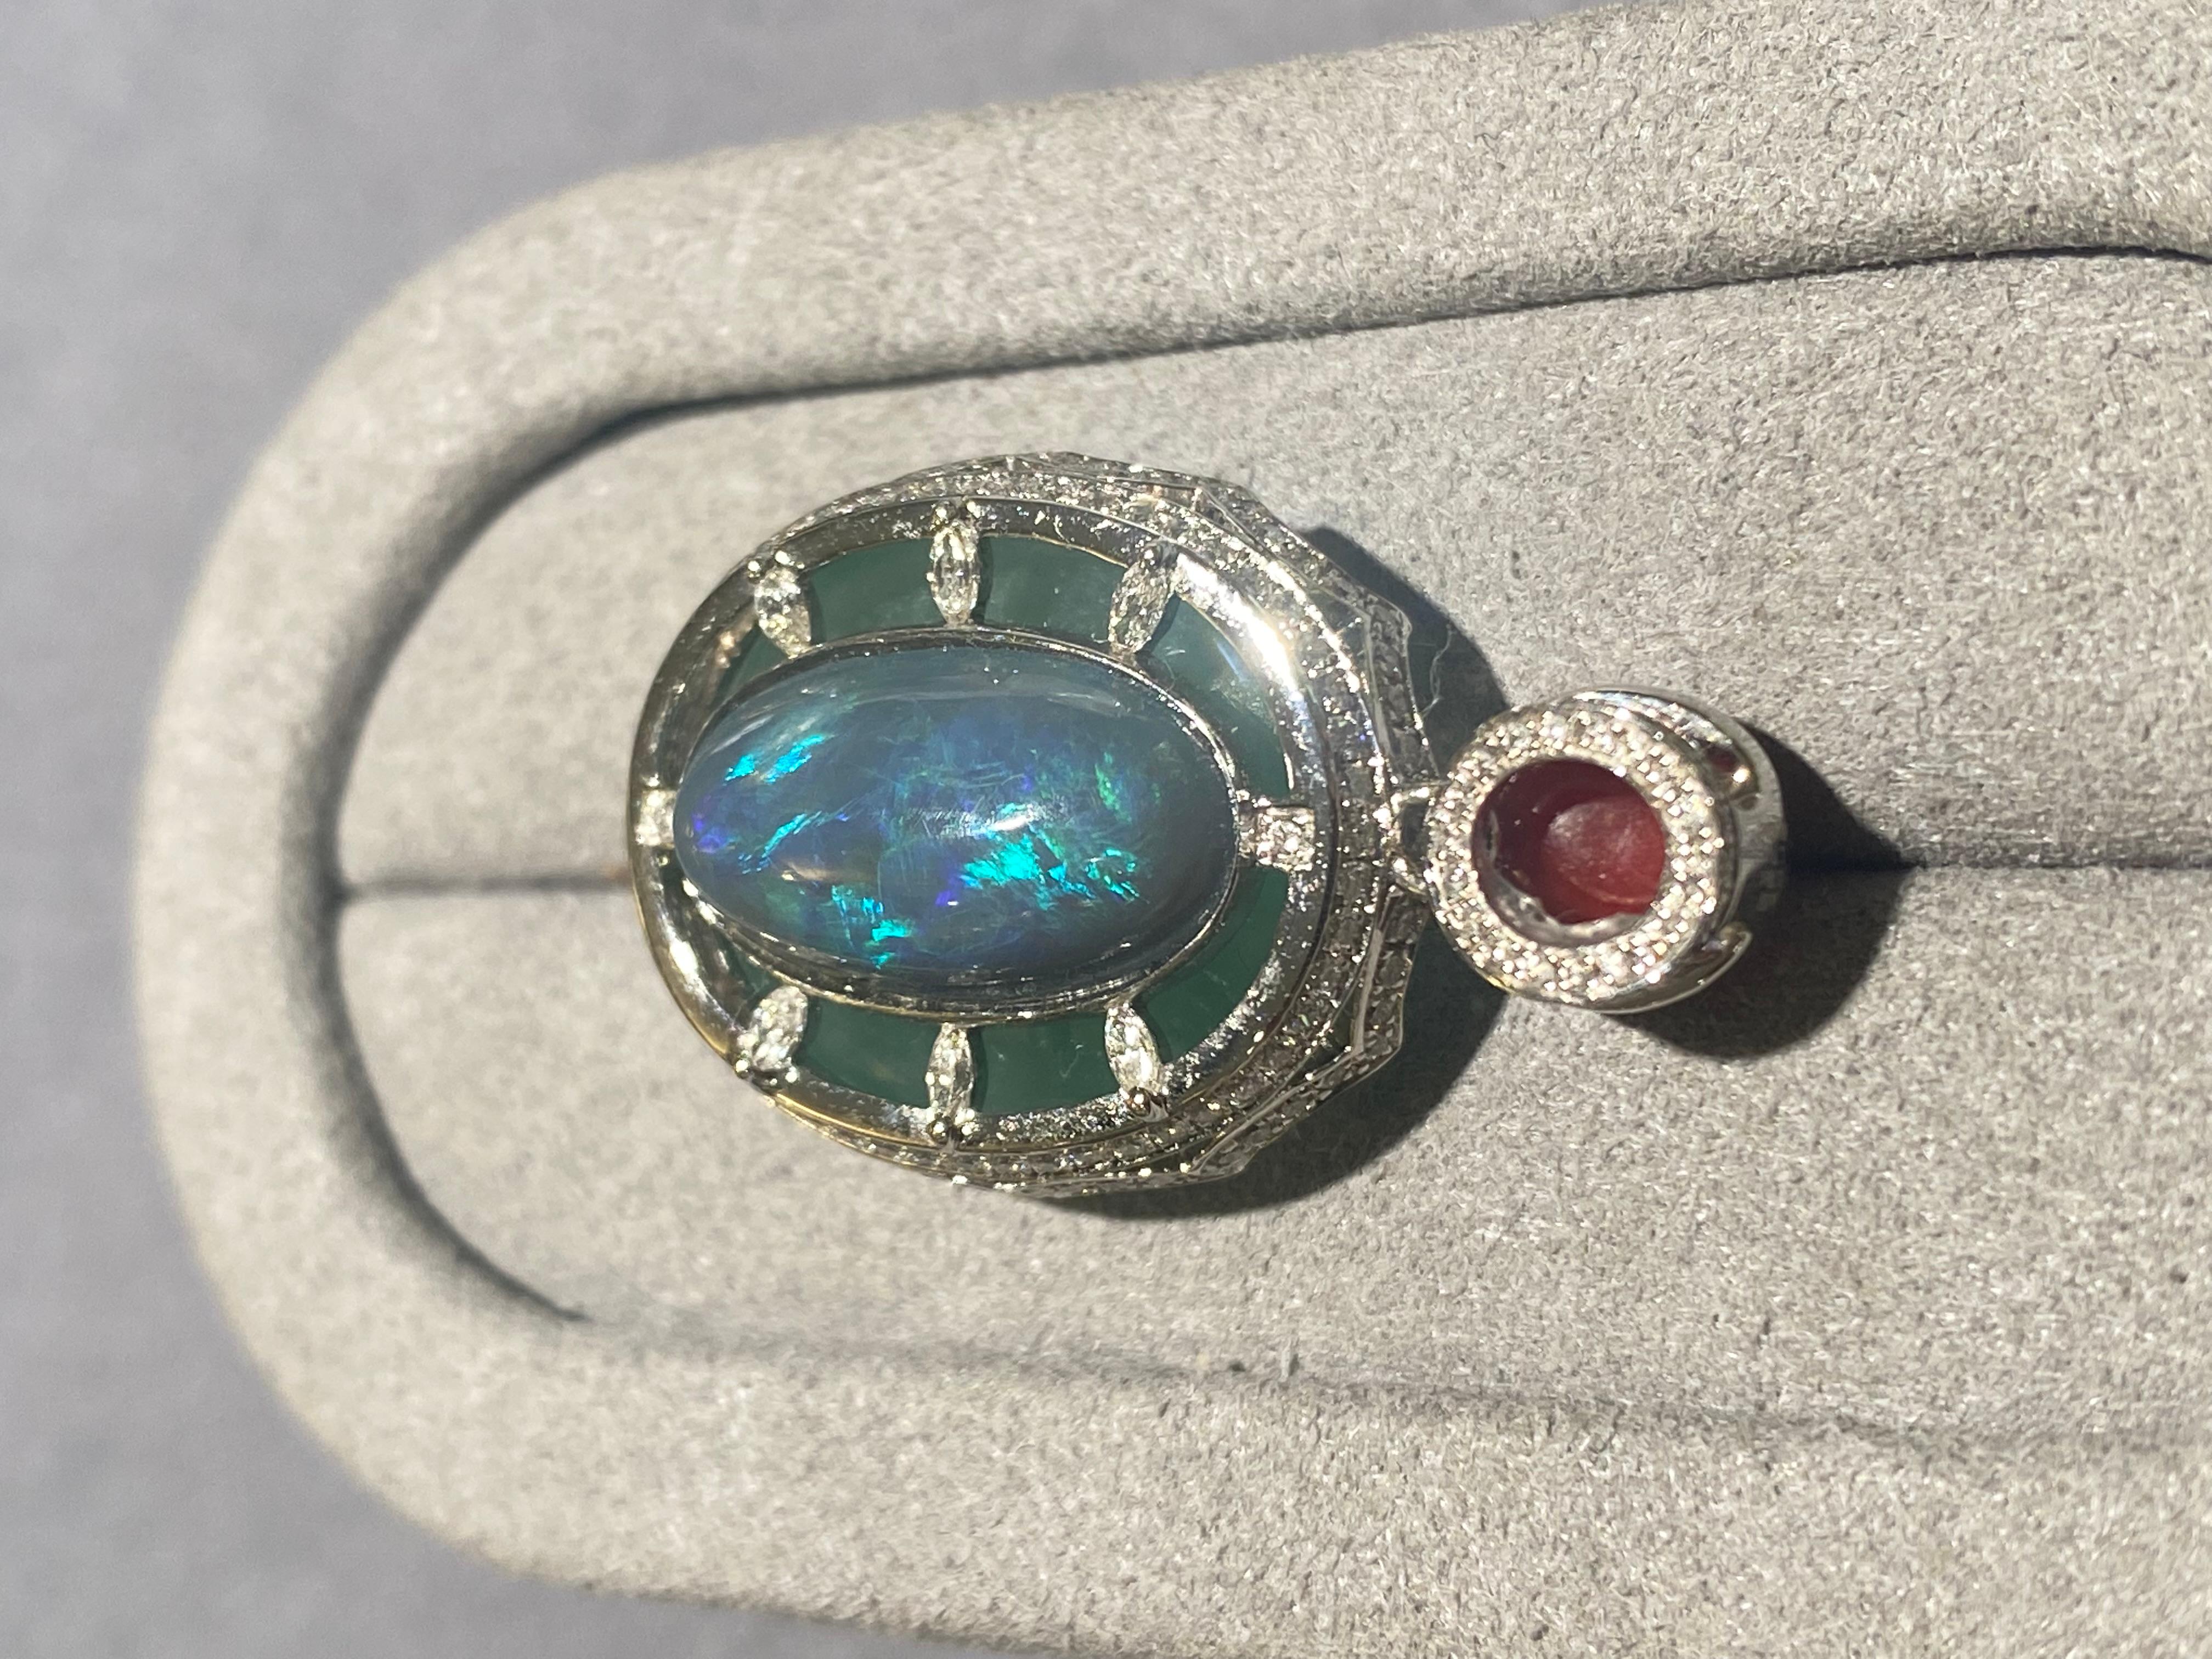 This is a double sided pendant. You can wear it either way depending on the occasions. On one side, it has a large type A green jadeite cabochon with a red coral bale. On the other side, you have a solid opal with diamond pave on the bale. 

Main